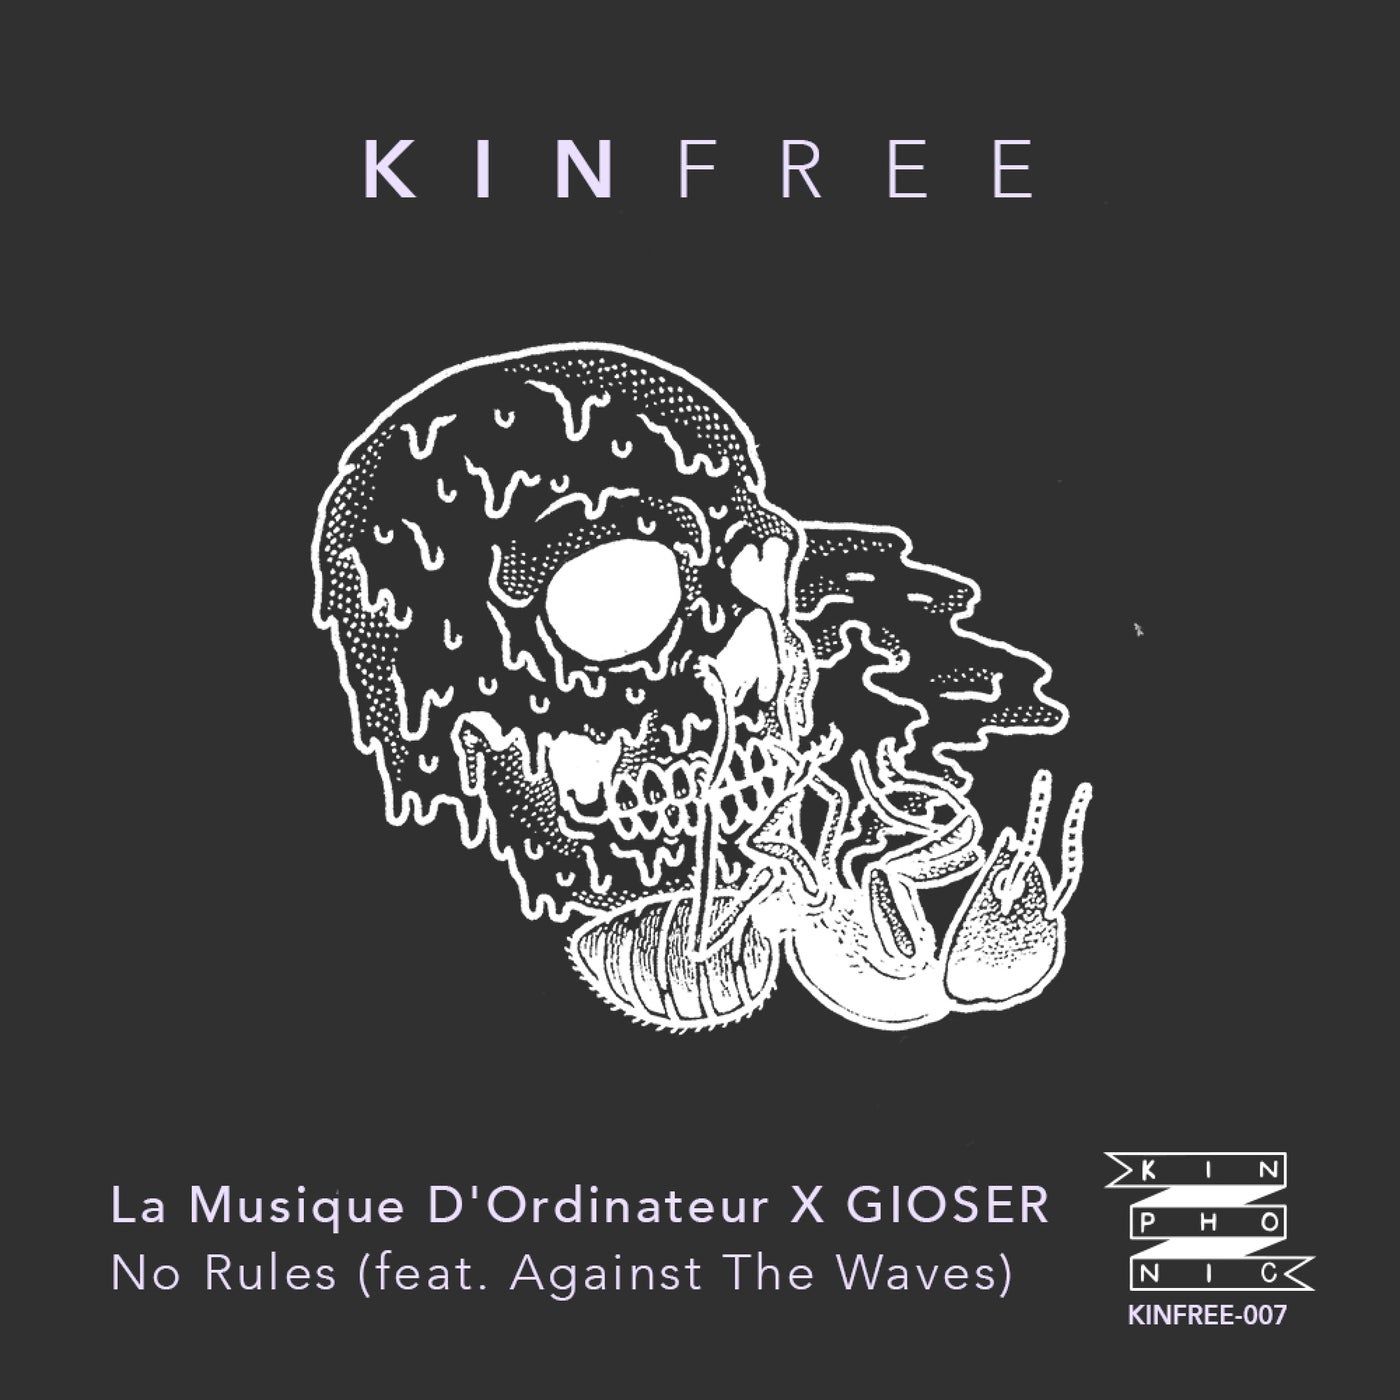 No Rules (feat. Against the Waves)